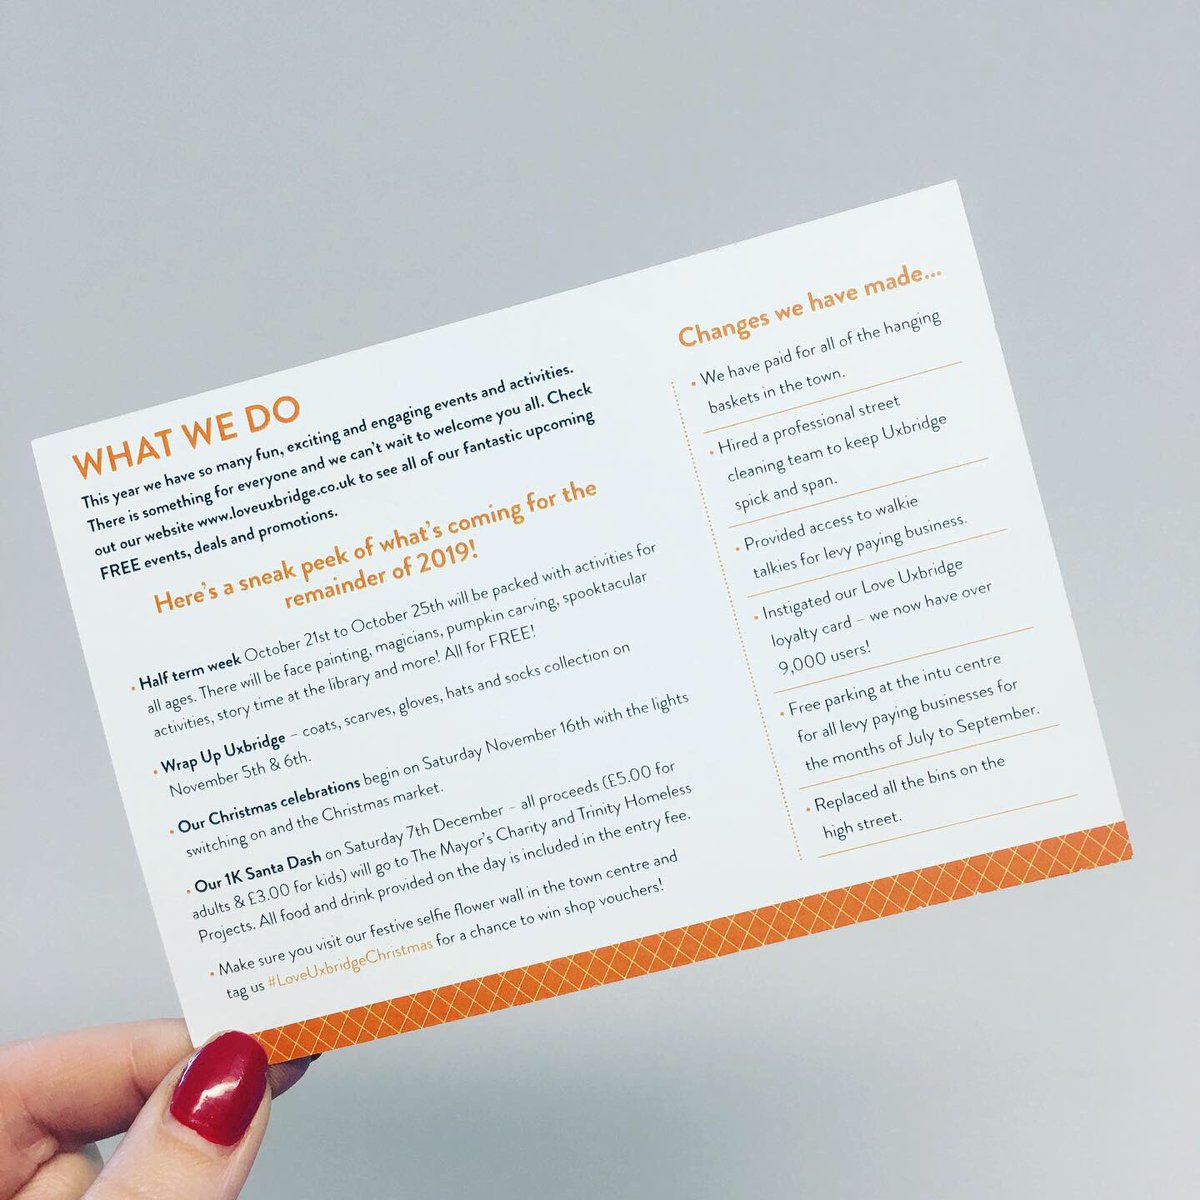 Our BID postcard is here! Ever wondered who or what we are/do ? Don’t worry you’re not the first 😂 time to read more about Uxbridge BID/ Love Uxbridge! #loveuxbridge #uxbridge #uxbridgebid @LoveUxbridge